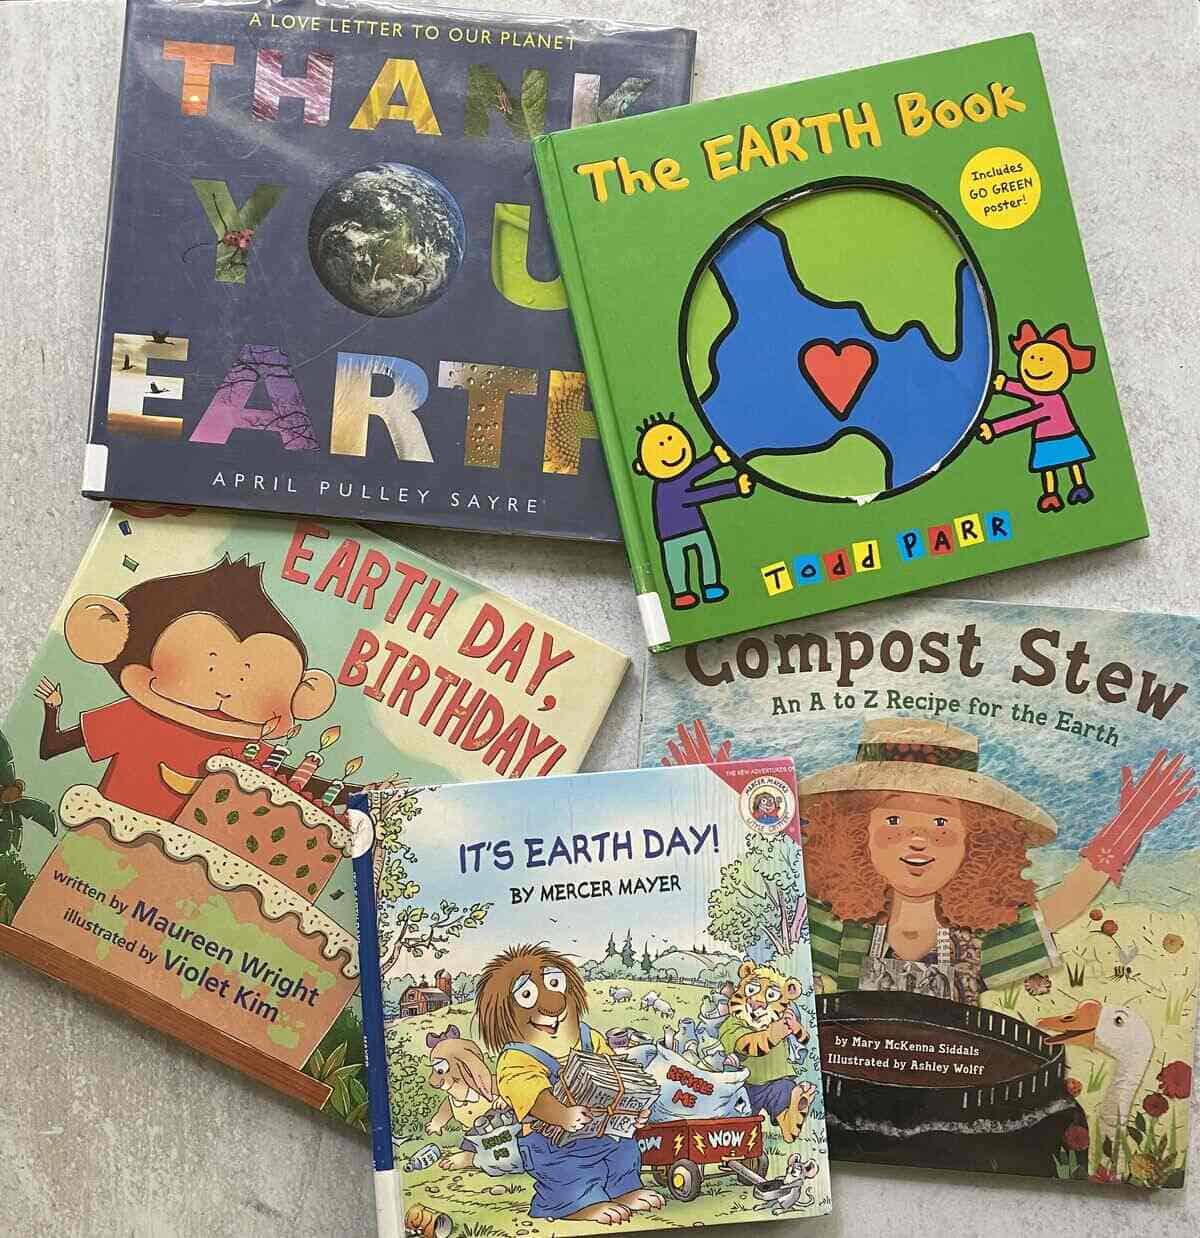 Five kid-friendly Earth Day books laid out on a gray board.